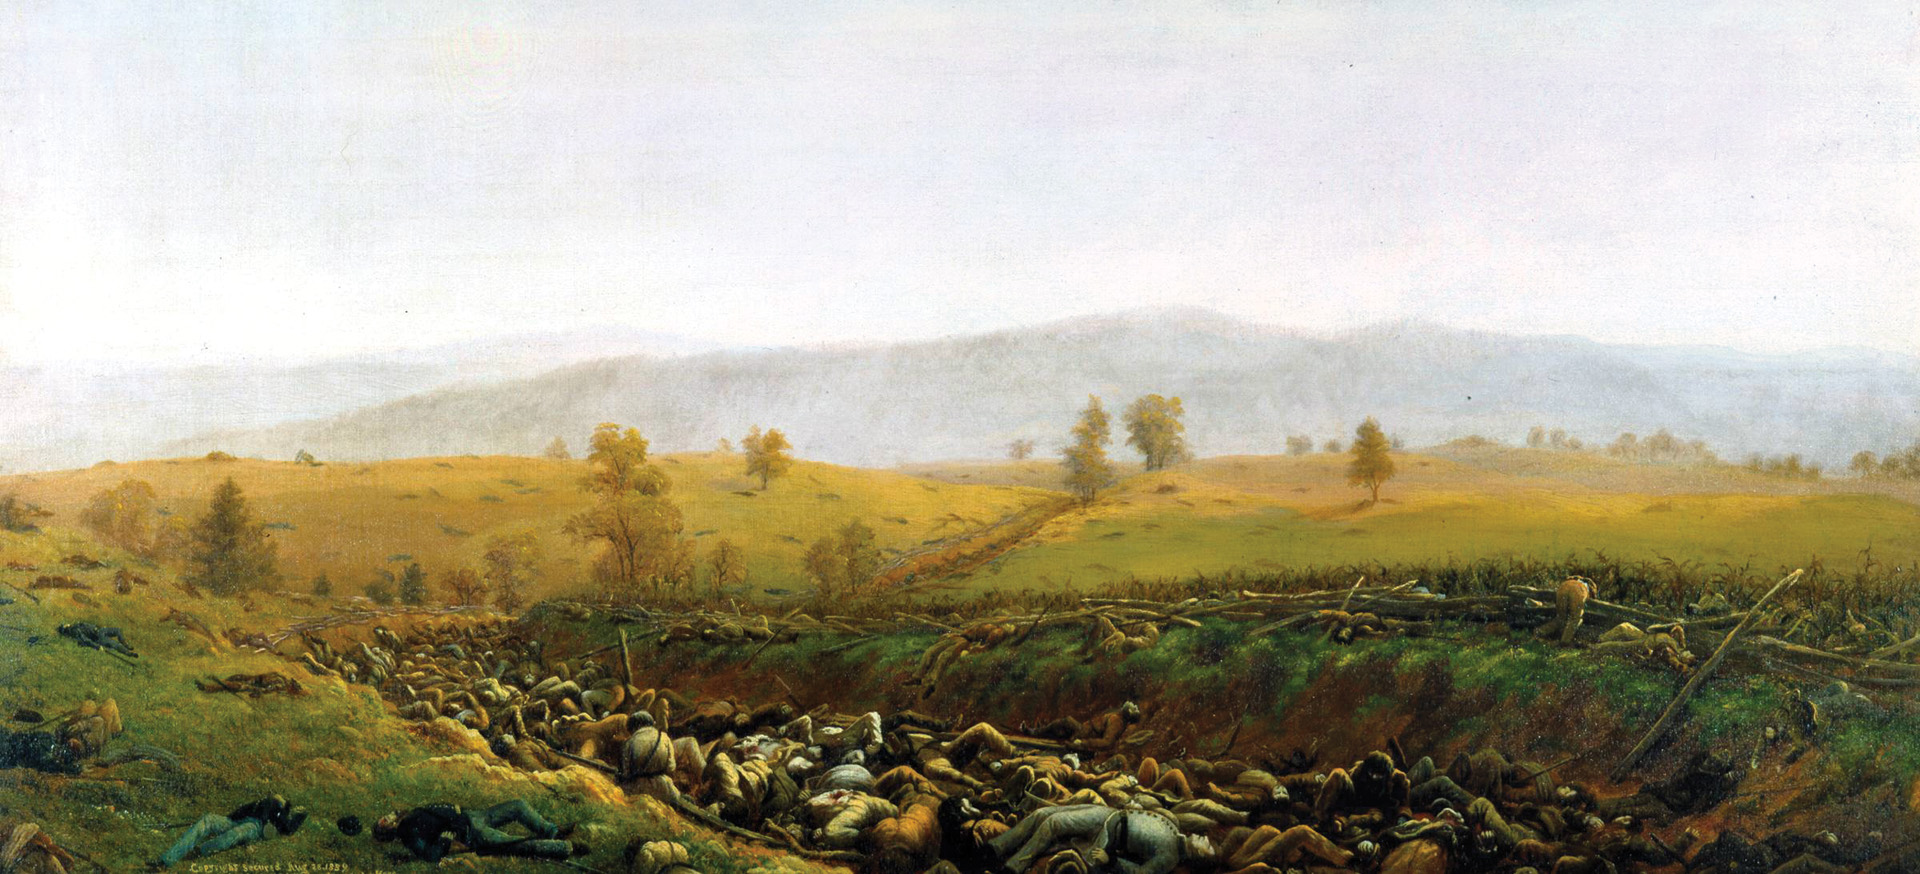 Union Captain James Hope of the 2nd Vermont Volunteers fought at Antietam and afterward painted this tragic scene of Confederate dead lying in the Sunken Road. The Yankees captured the position but could not advance beyond it.